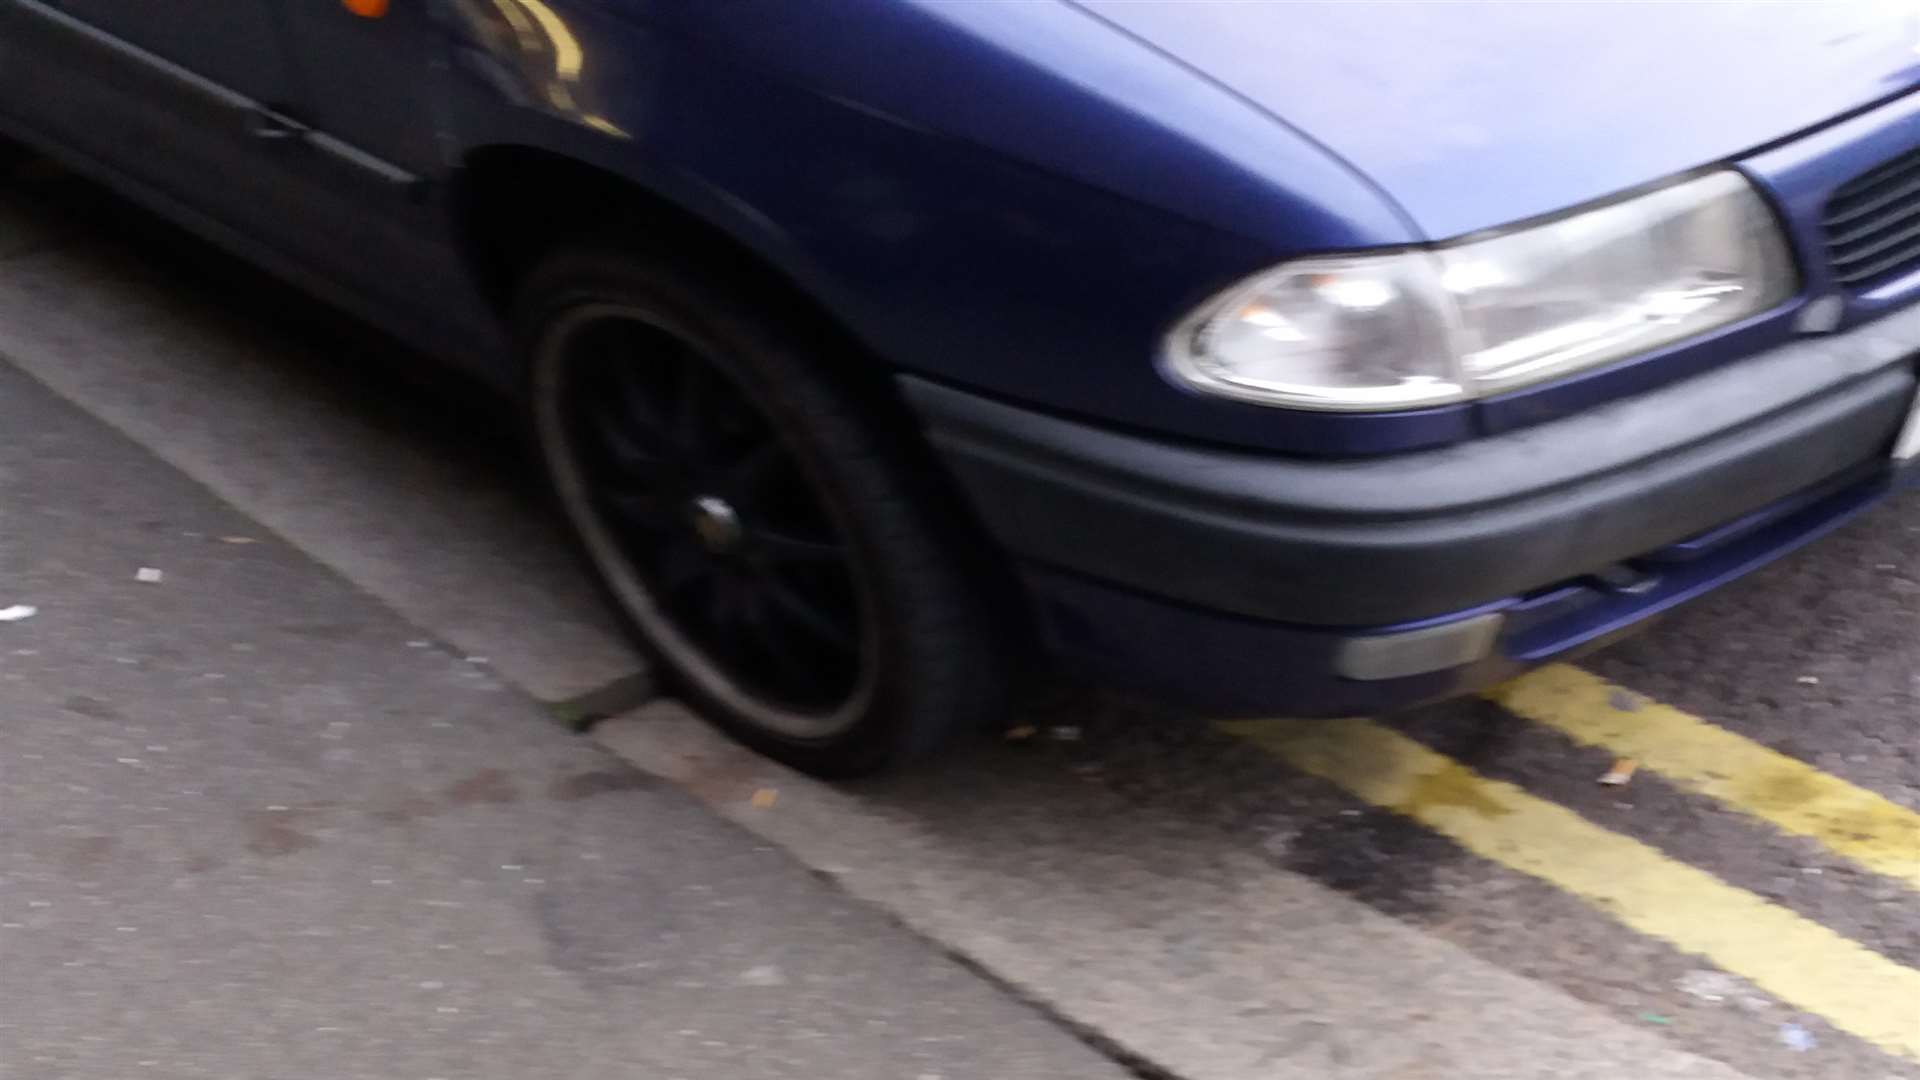 Dover High Street. Cars on double yellow lines,can even damage kerbstones